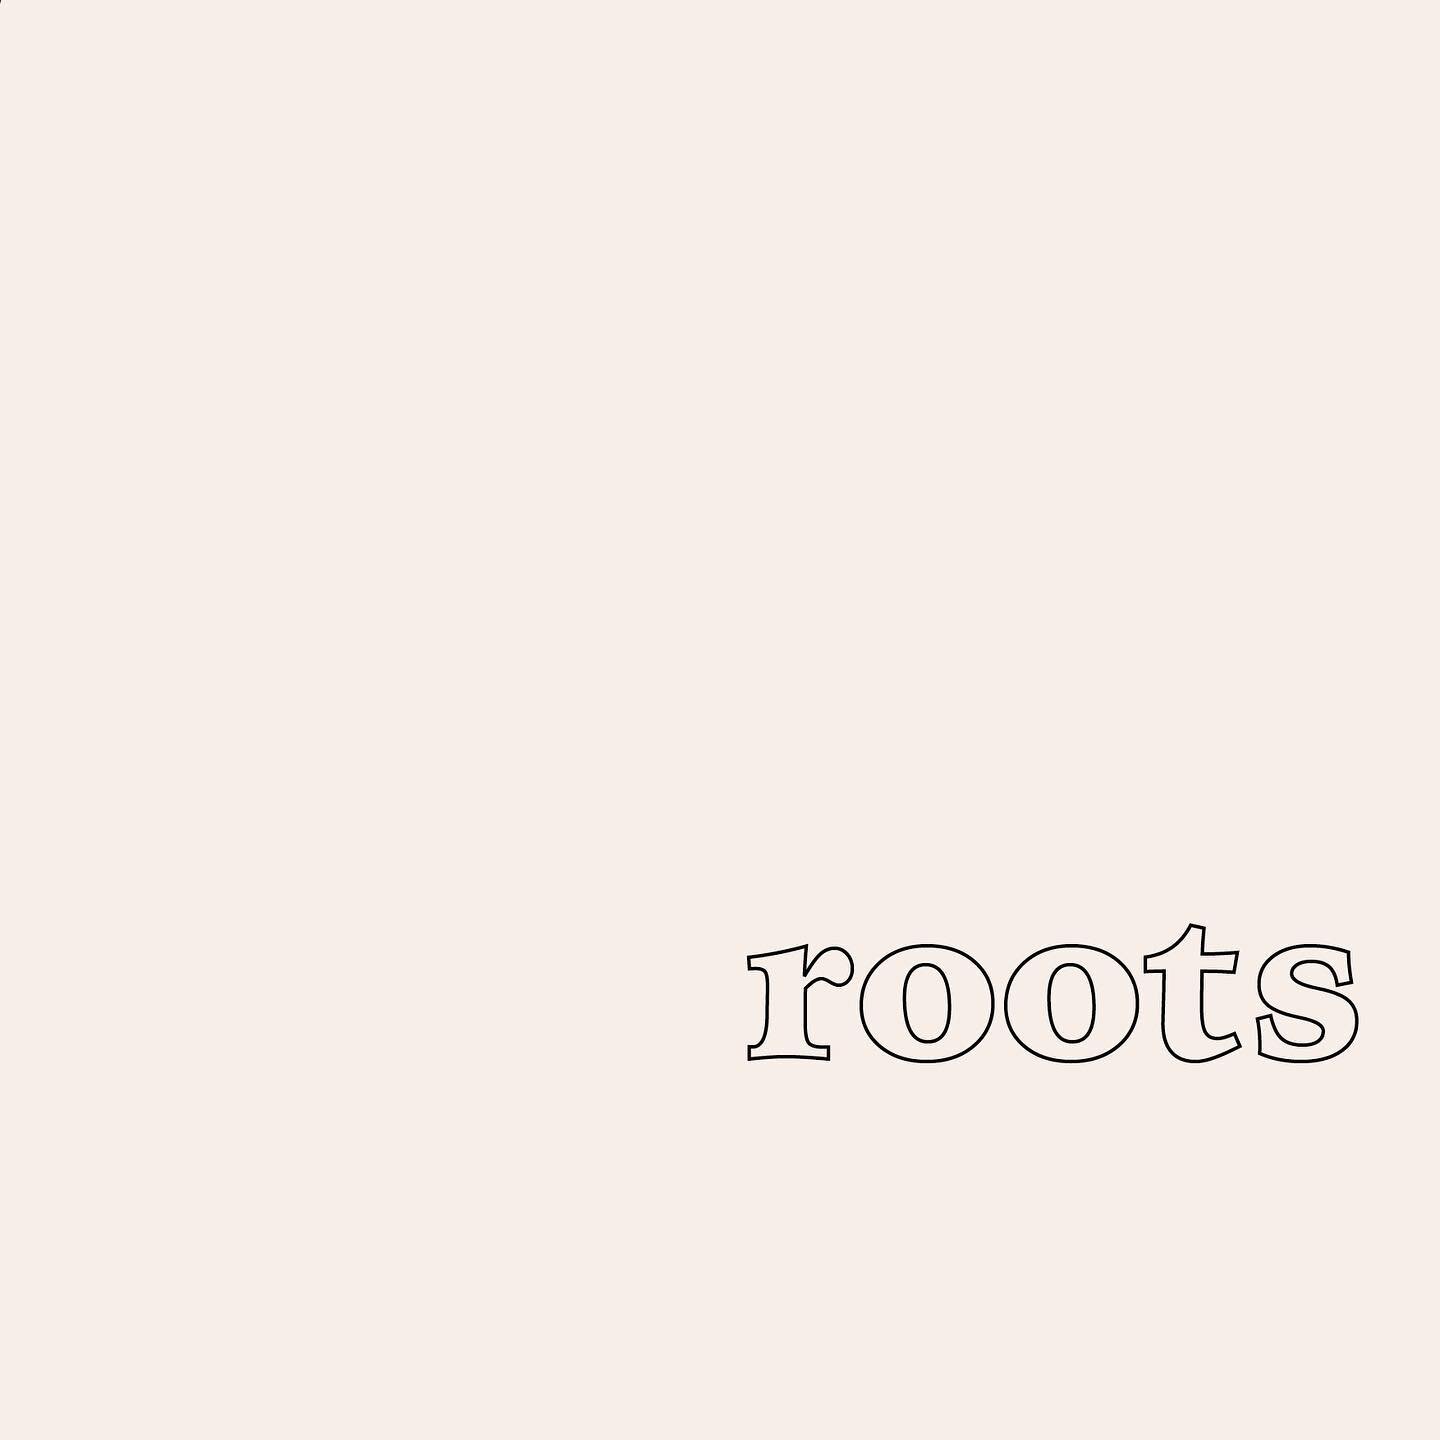 Introducing Roots! Roots is our midweek life group. We meet on Wednesdays at 7:30pm on zoom. We won&rsquo;t be meeting this week but please send us a message if you&rsquo;d like to know more or want to meet up with one of us for a walk/coffee and hea